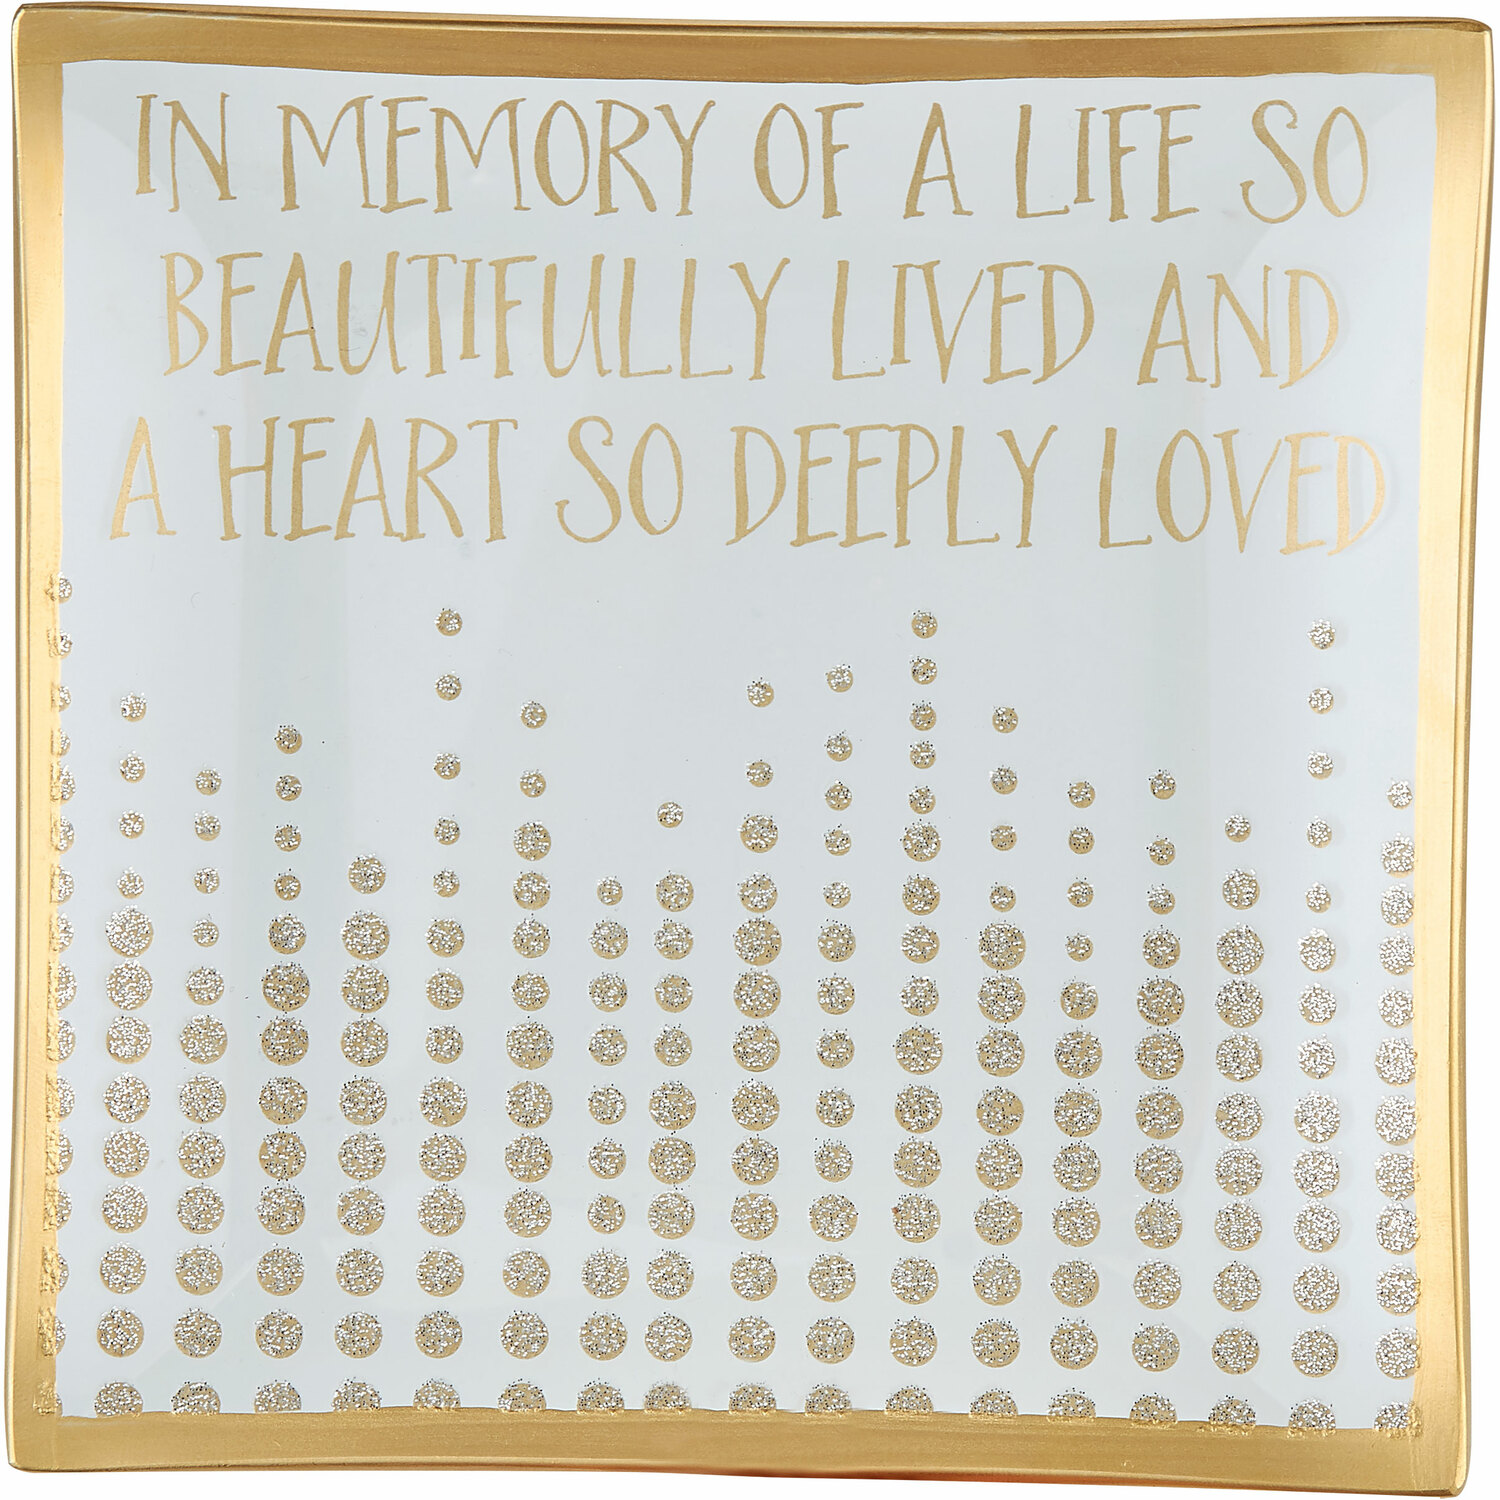 In Memory by Candle Decor - In Memory - Square Plate